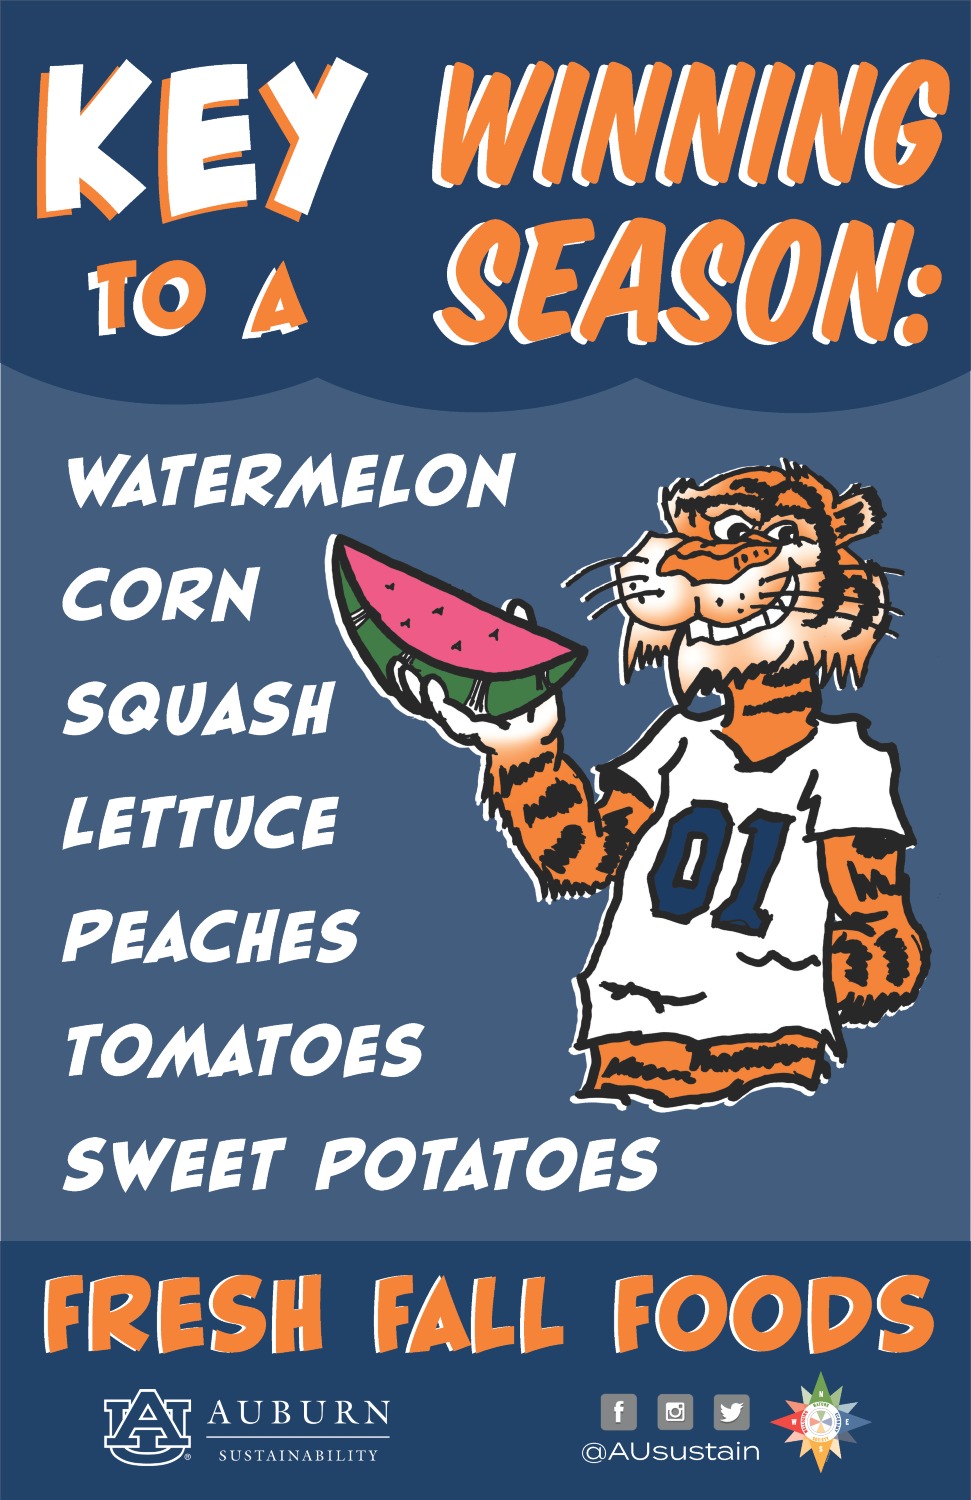 Graphic listing seasonal foods for fall in Alabama.